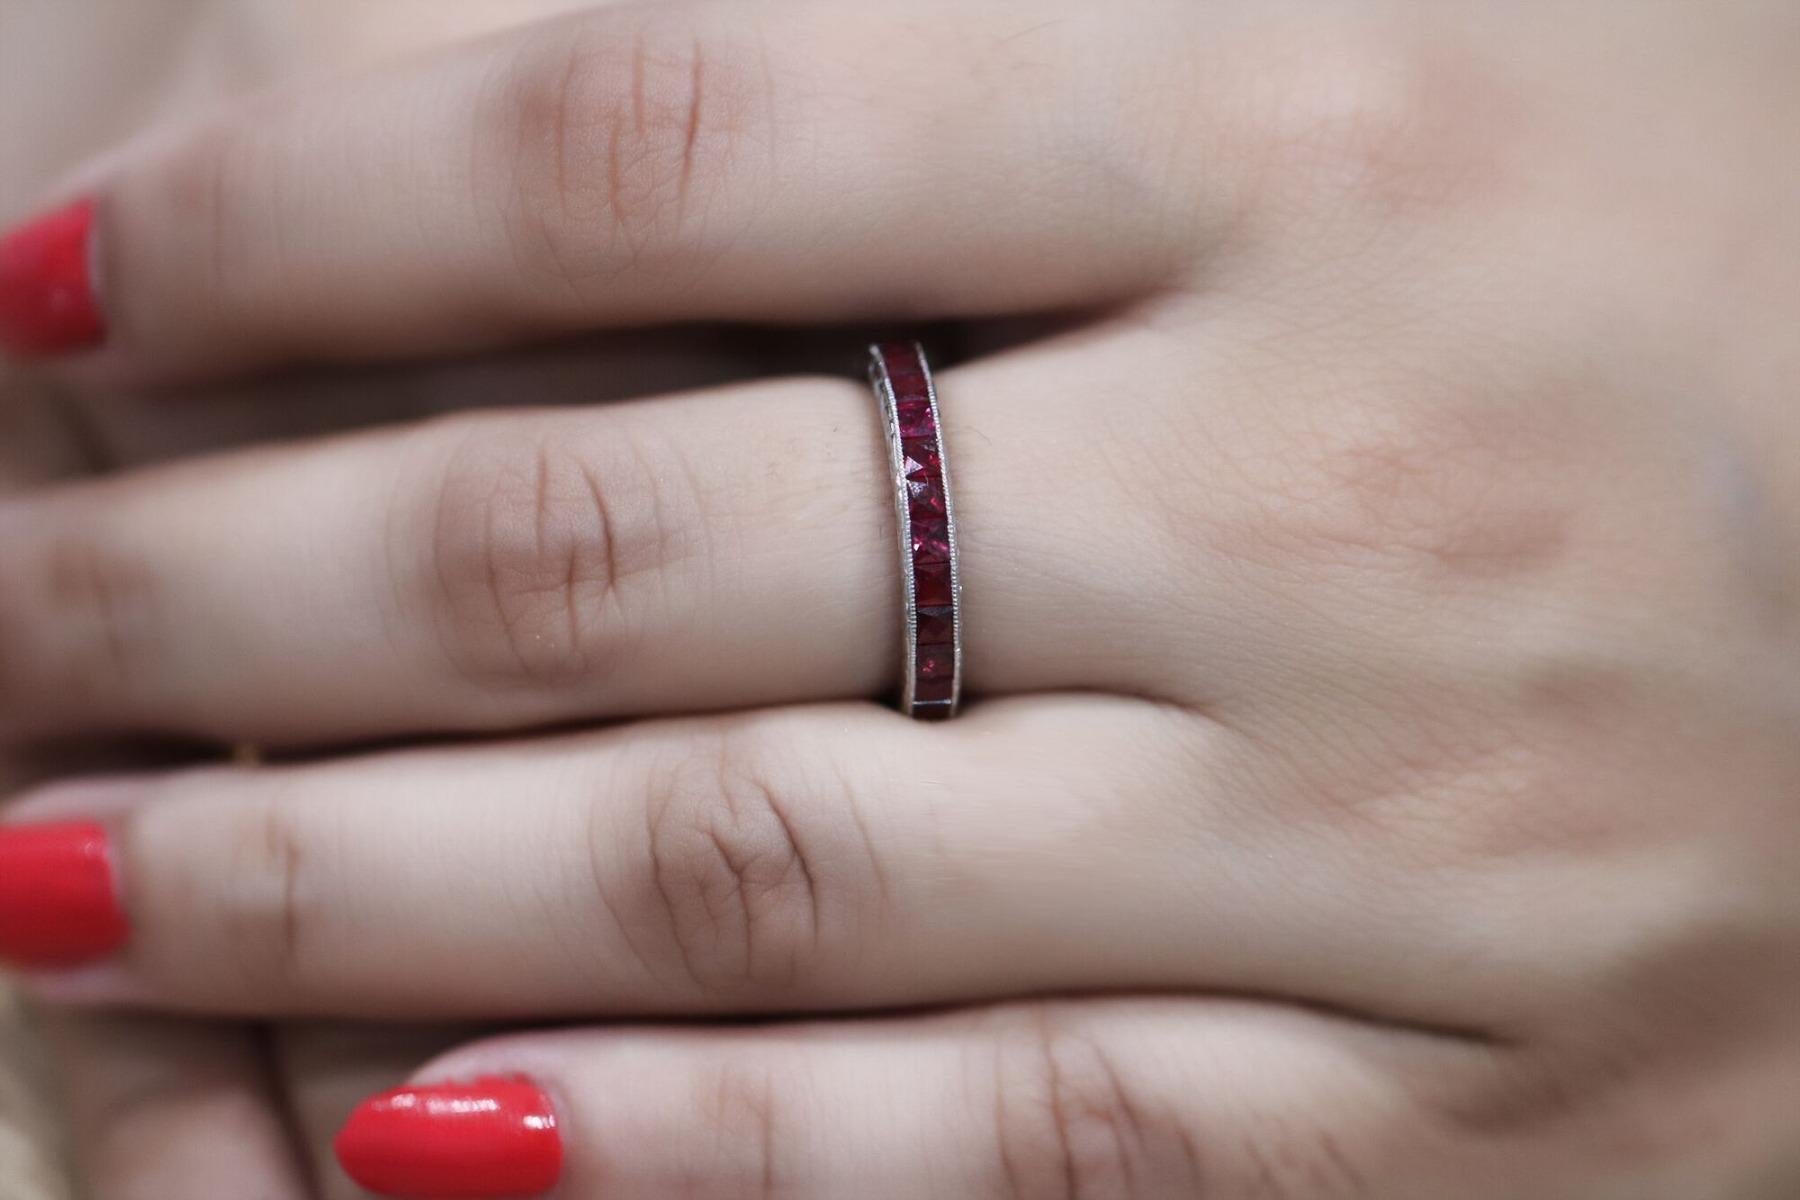 Art Deco at its best, using French calibre cut Precious Gemstones.

New World Technology meets Old World Styles!

Eternity Ring 

Metal: 18k White Gold

Condition: New

Ring Size: 6.5 

3 CT Ruby